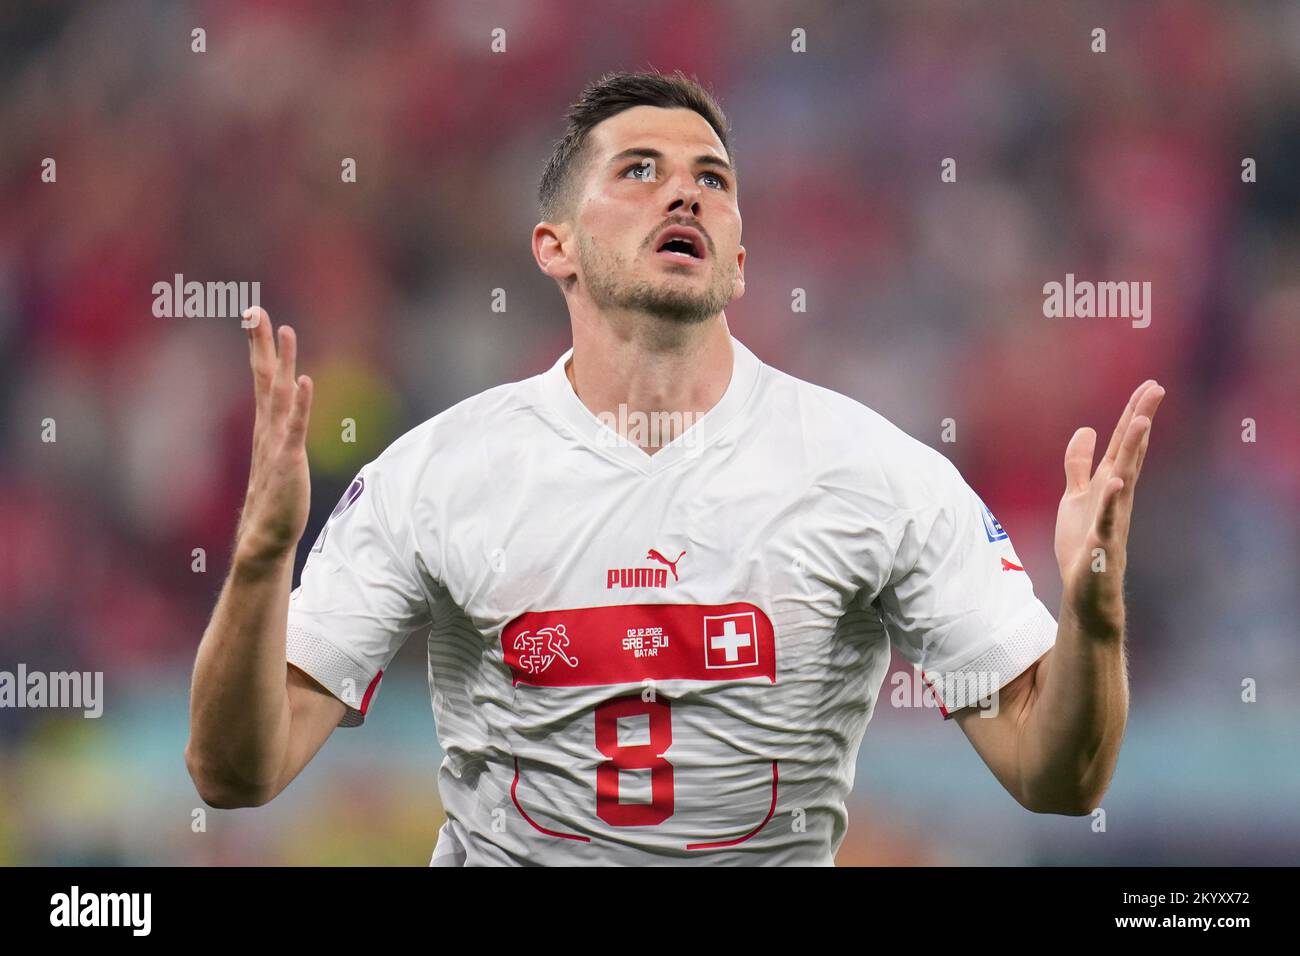 Doha, Qatar. 2nd Dec, 2022. Remo Freuler of Switzerland celebrates scoring during the Group G match between Serbia and Switzerland at the 2022 FIFA World Cup at Stadium 974 in Doha, Qatar, Dec. 2, 2022. Credit: Meng Dingbo/Xinhua/Alamy Live News Stock Photo